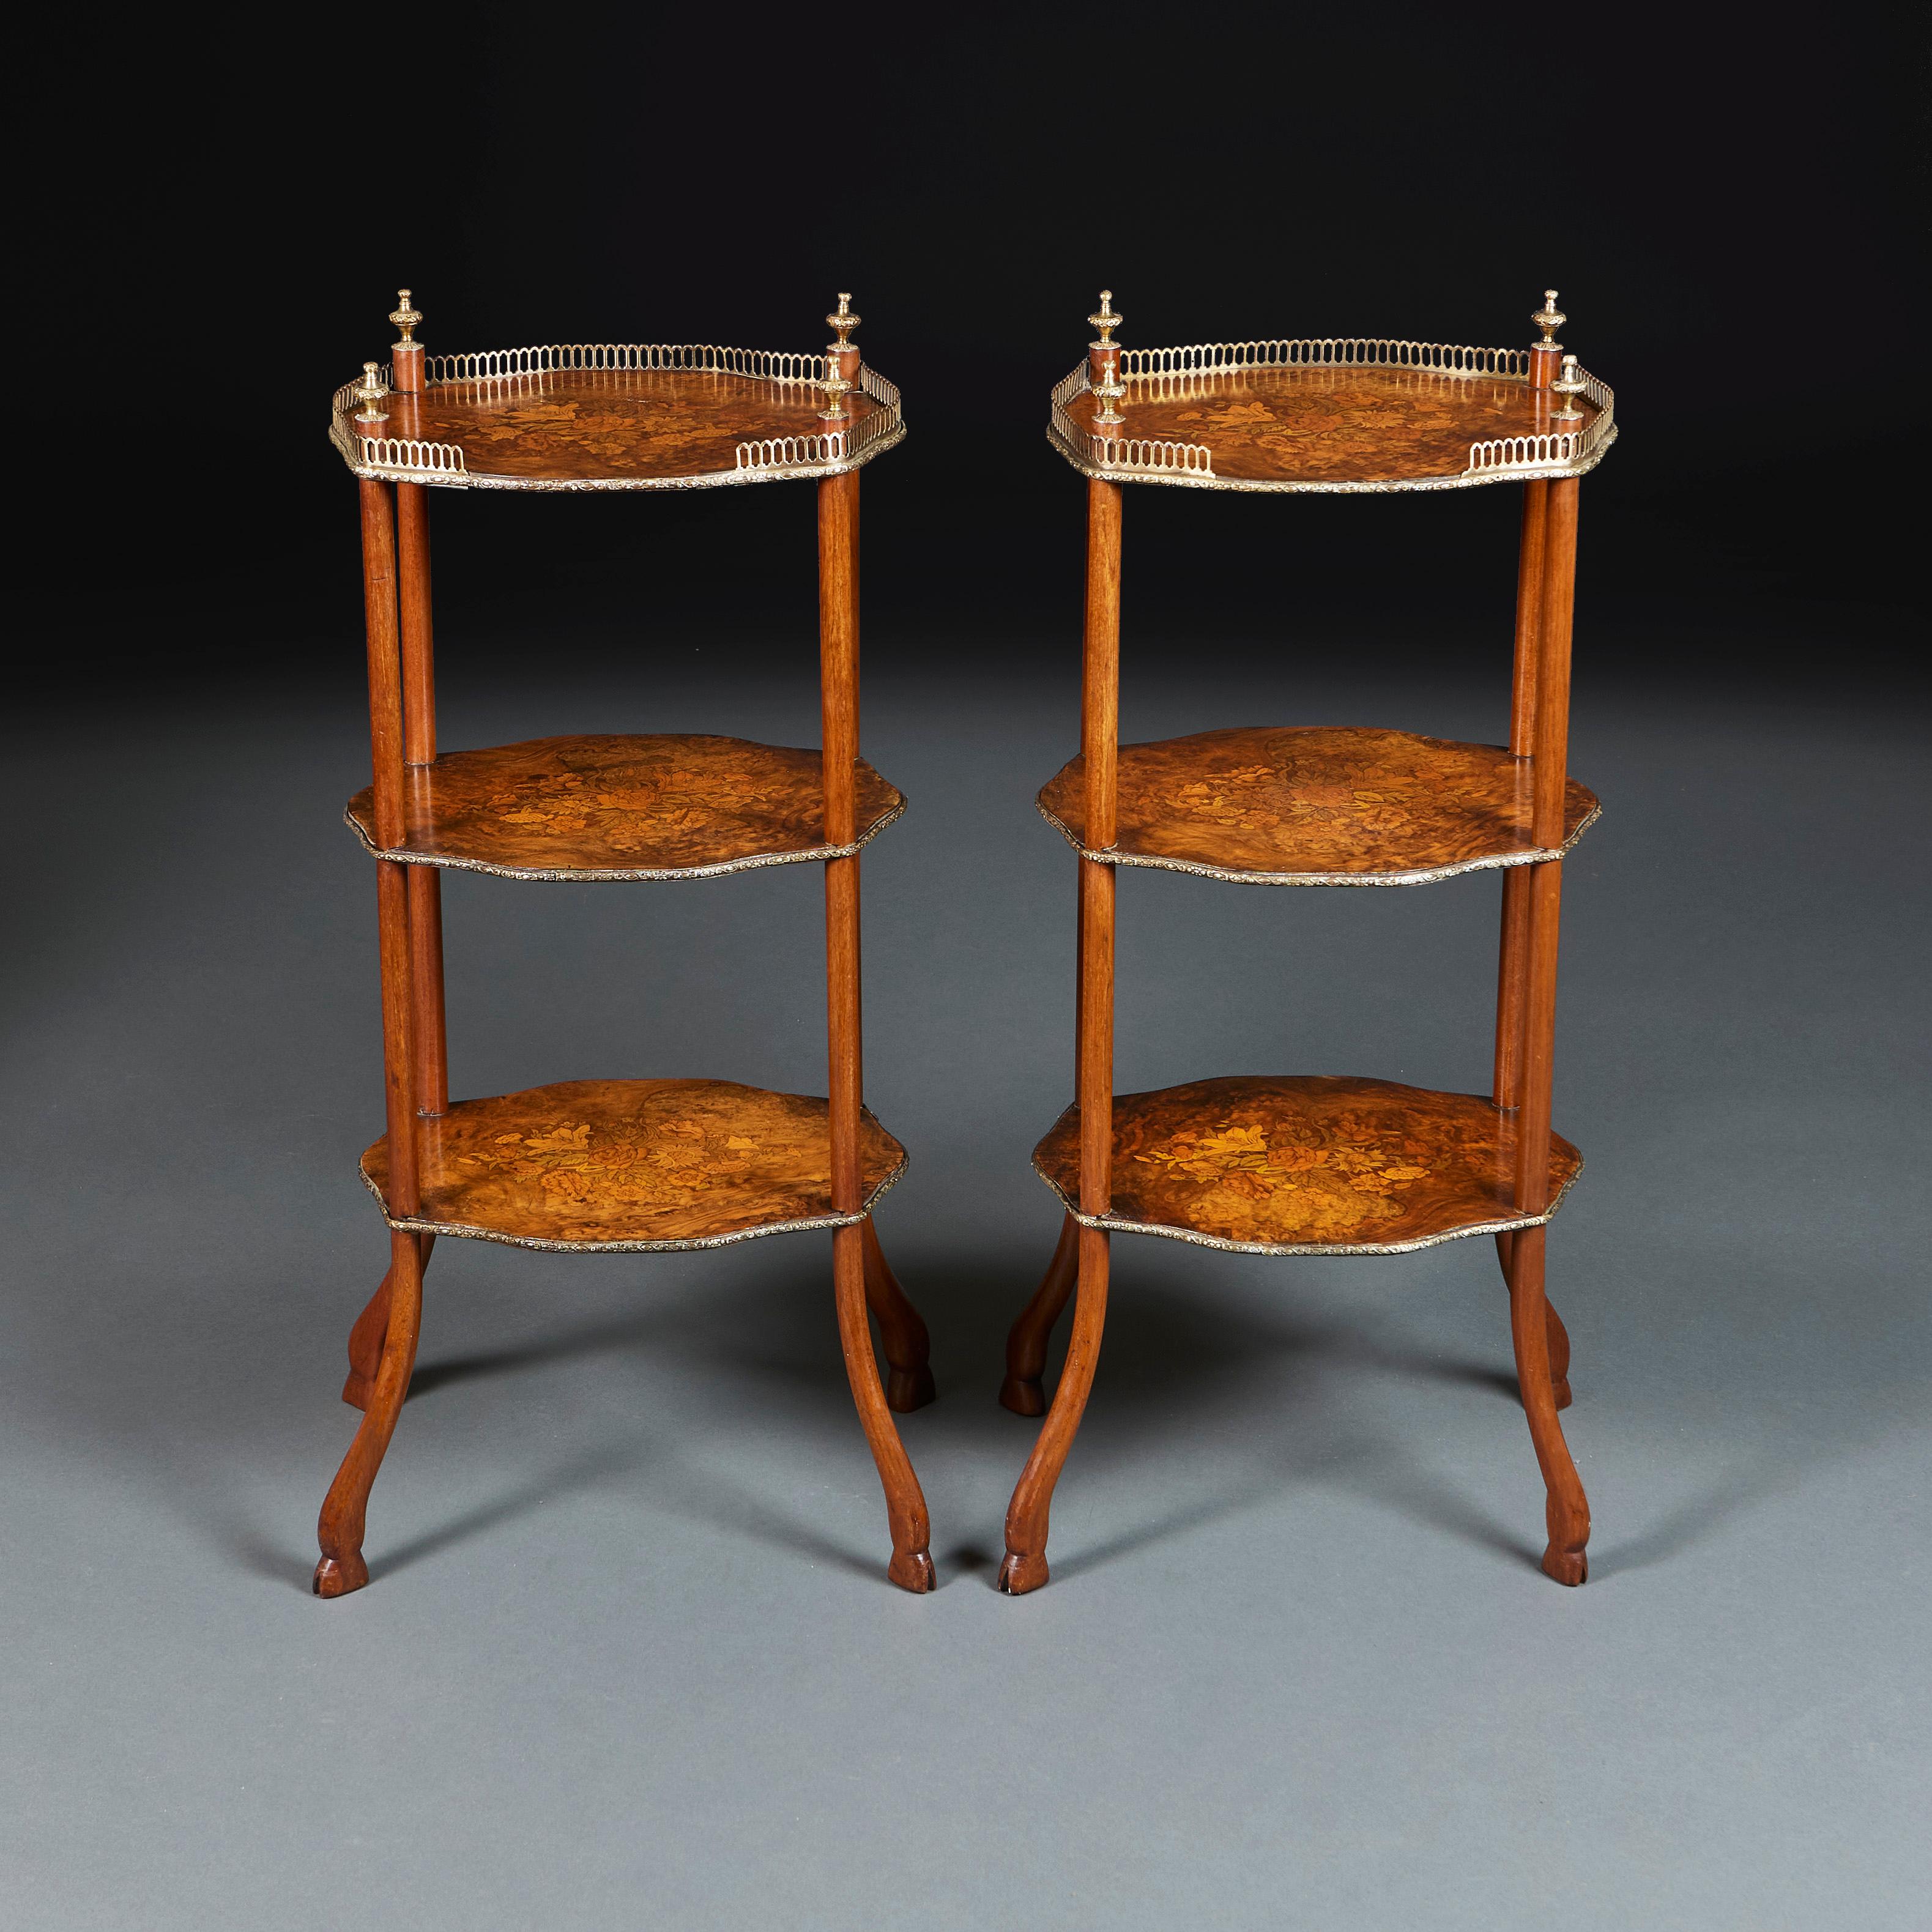 English Pair of 19th Century Marquetry Three Tier Etageres For Sale